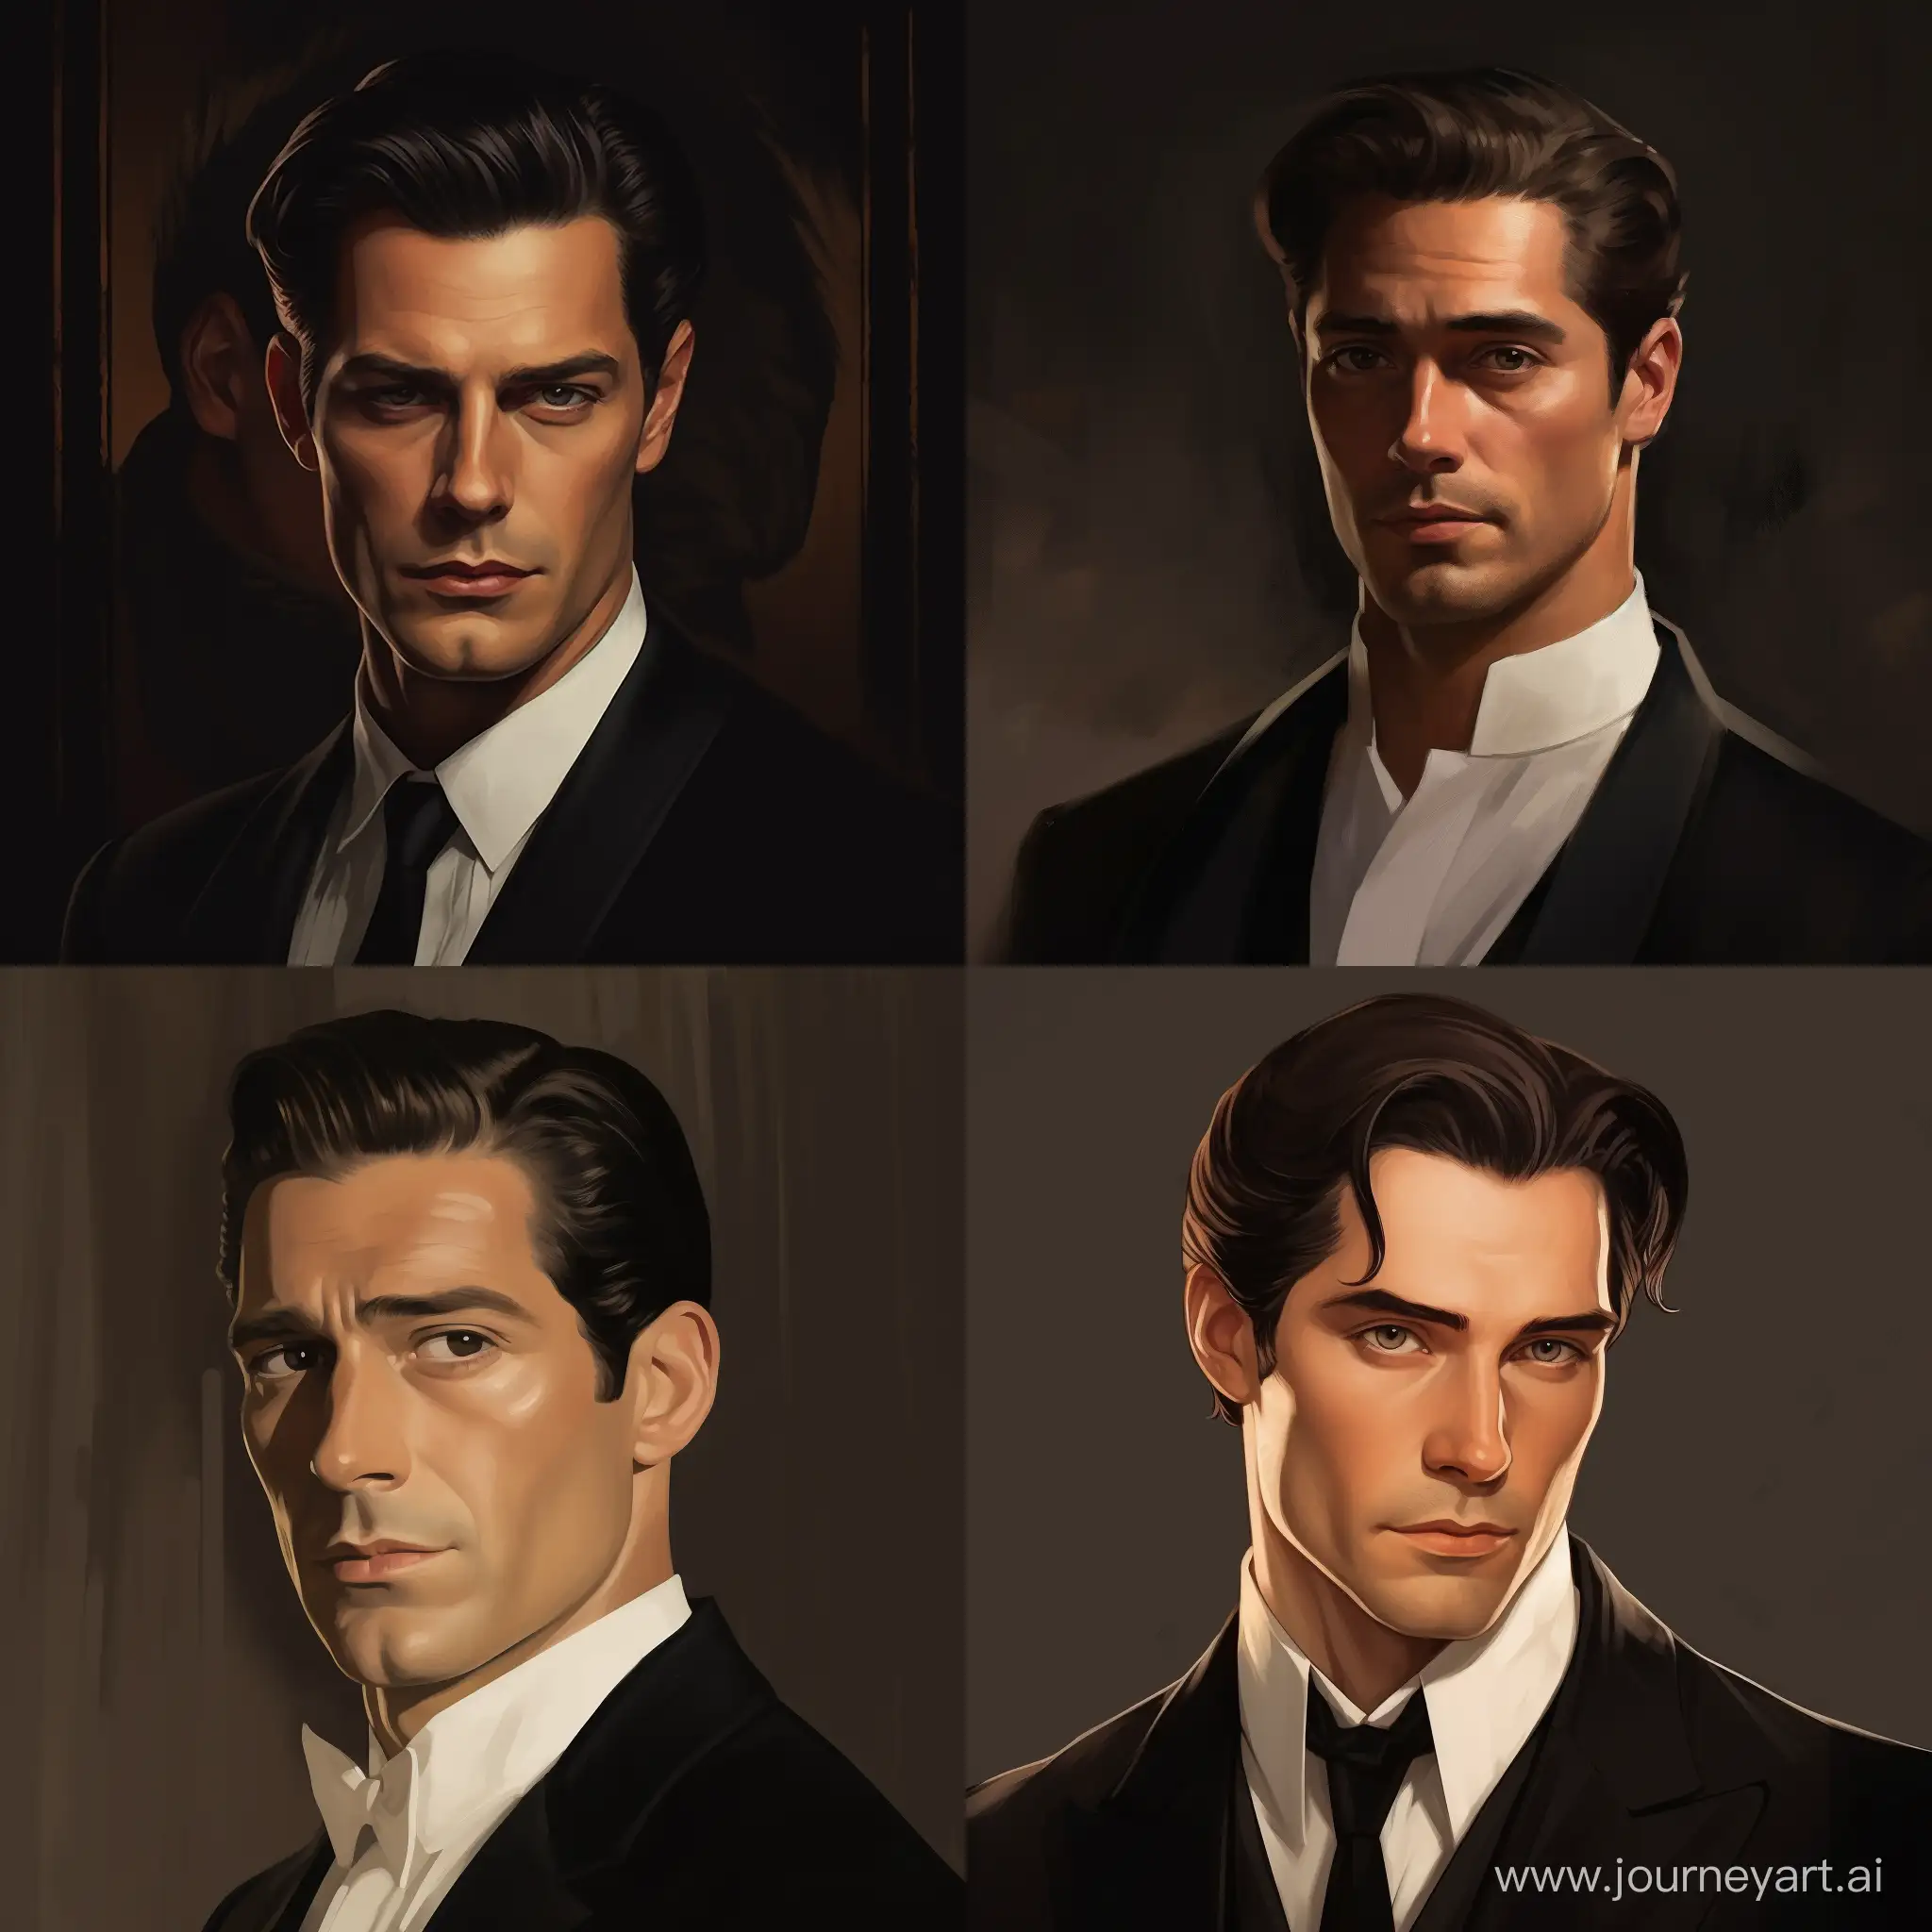 Charming-Man-with-Slicked-Back-Hair-and-Smirk-Portrait